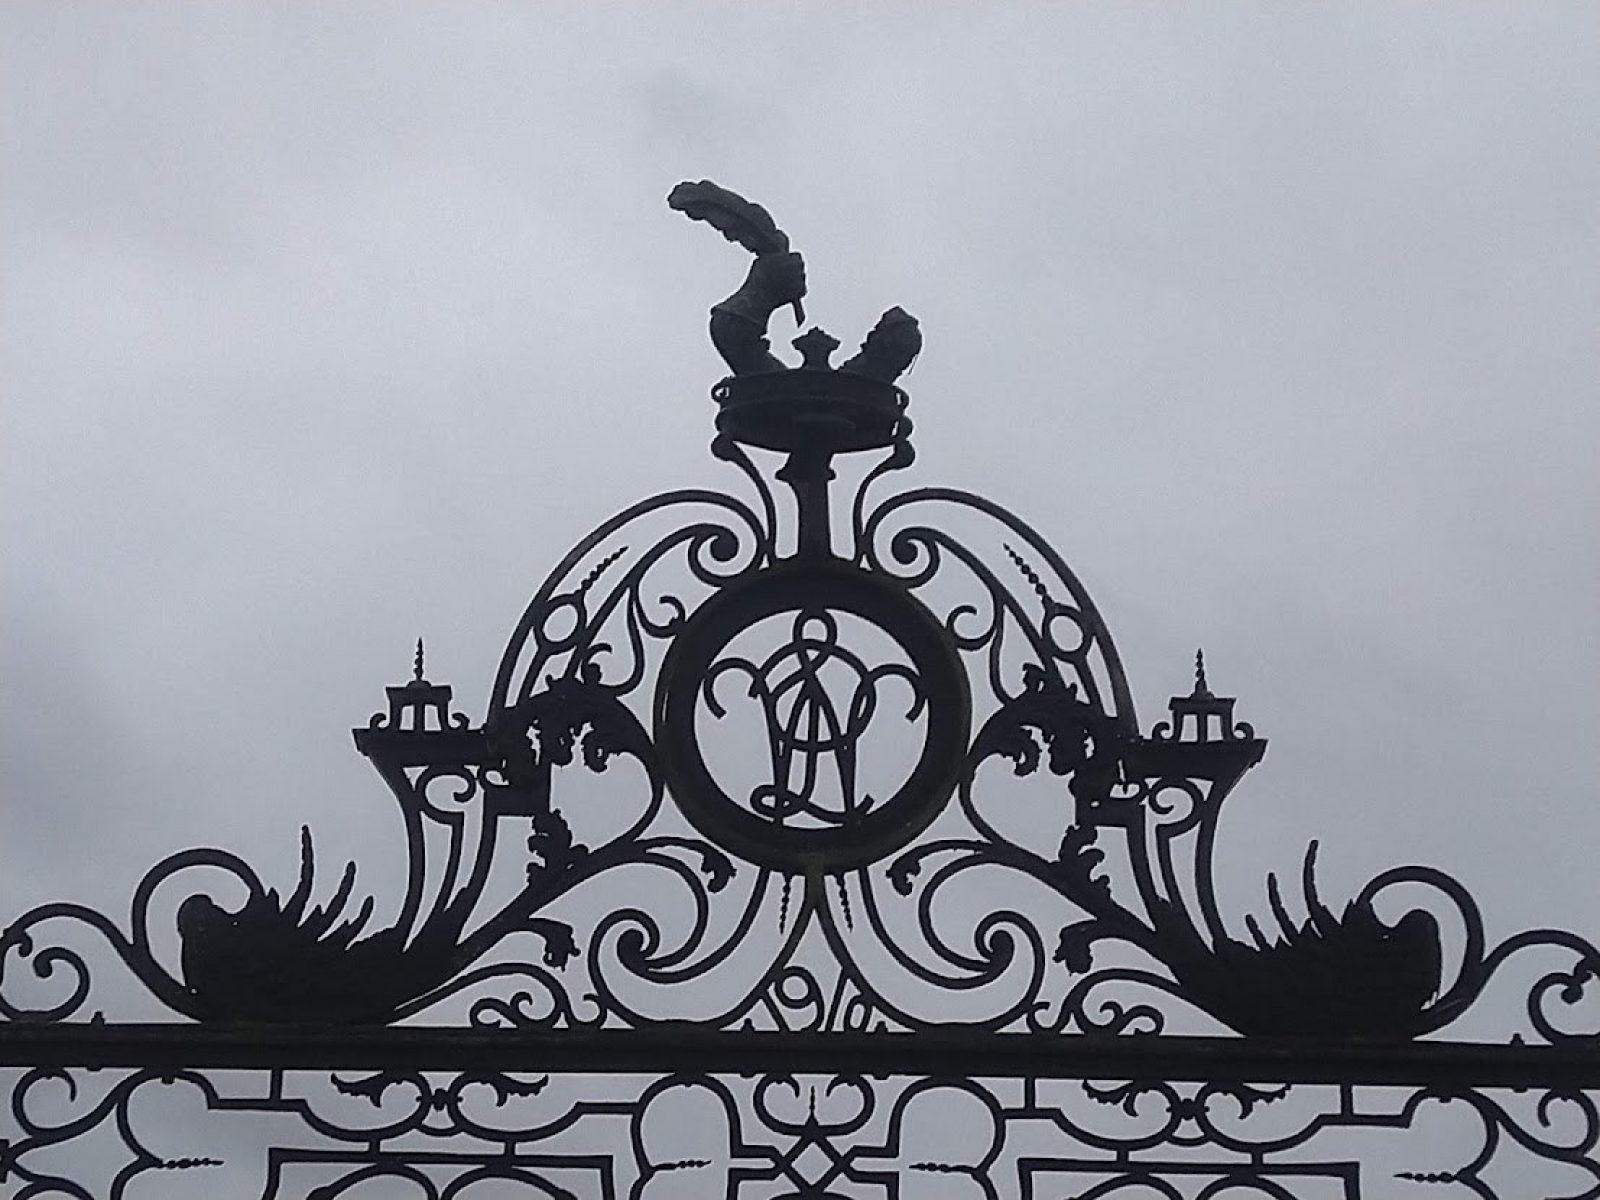 This ornate iron work rings the estate, often bearing the Cavendish emblem of a disembodied arm holding a feather aloft.